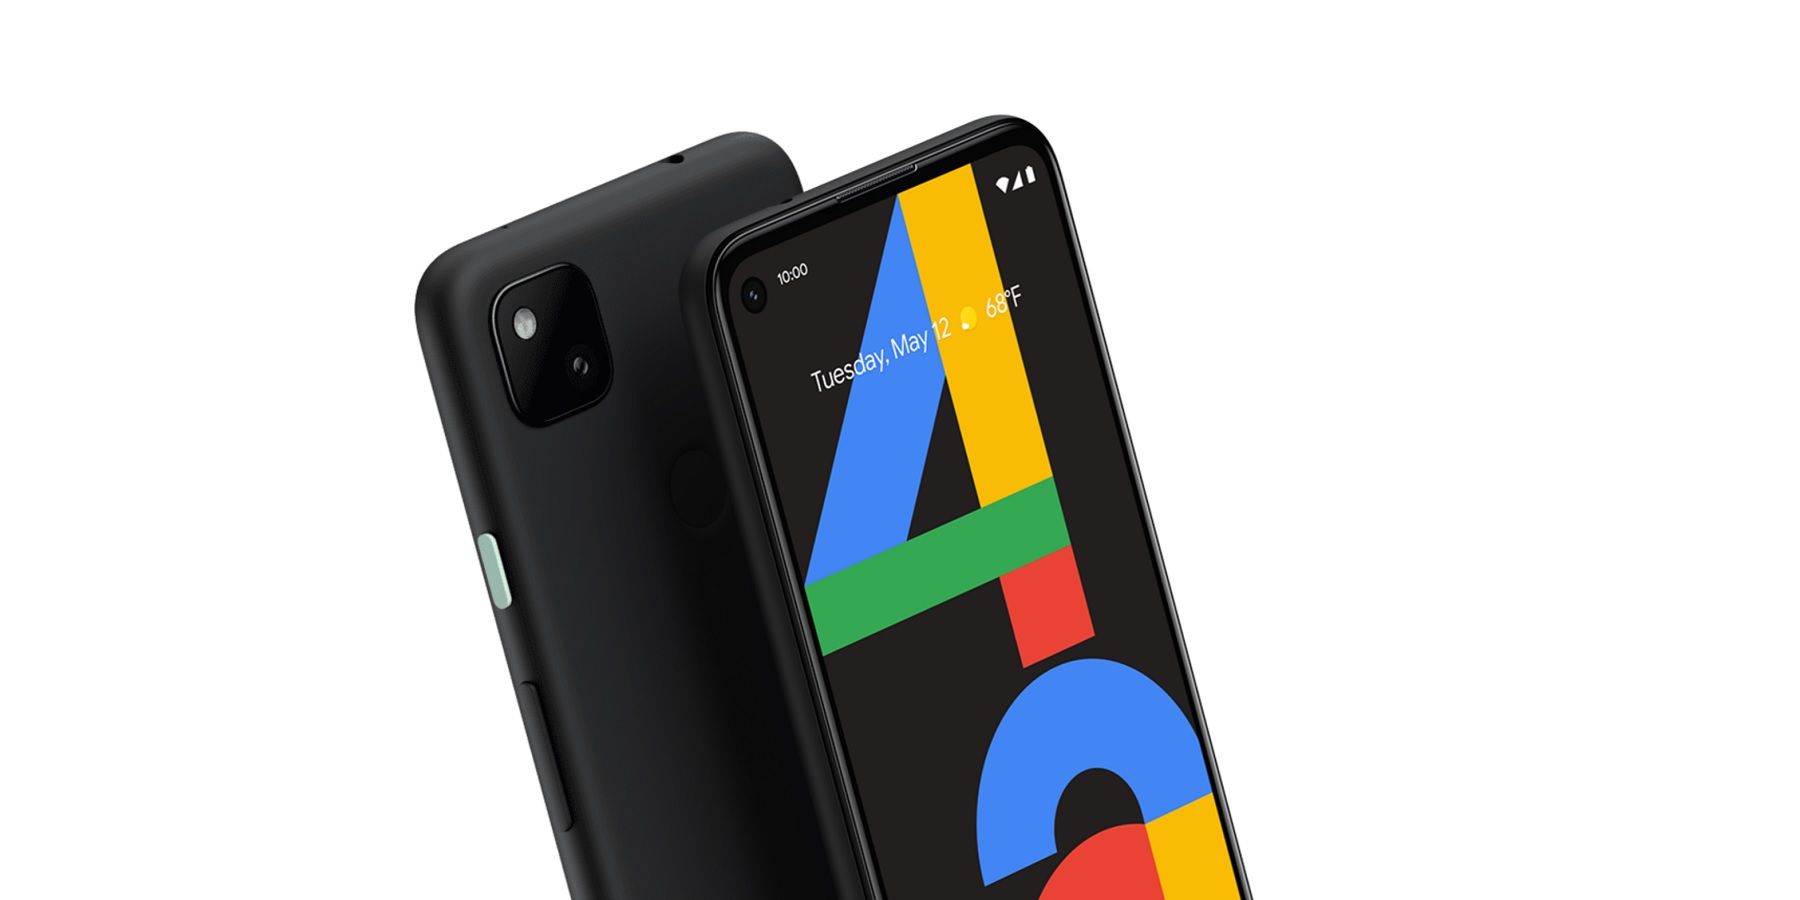 Google Pixel 4a Specs: RAM, Battery, Cameras, Display, & More In Detail